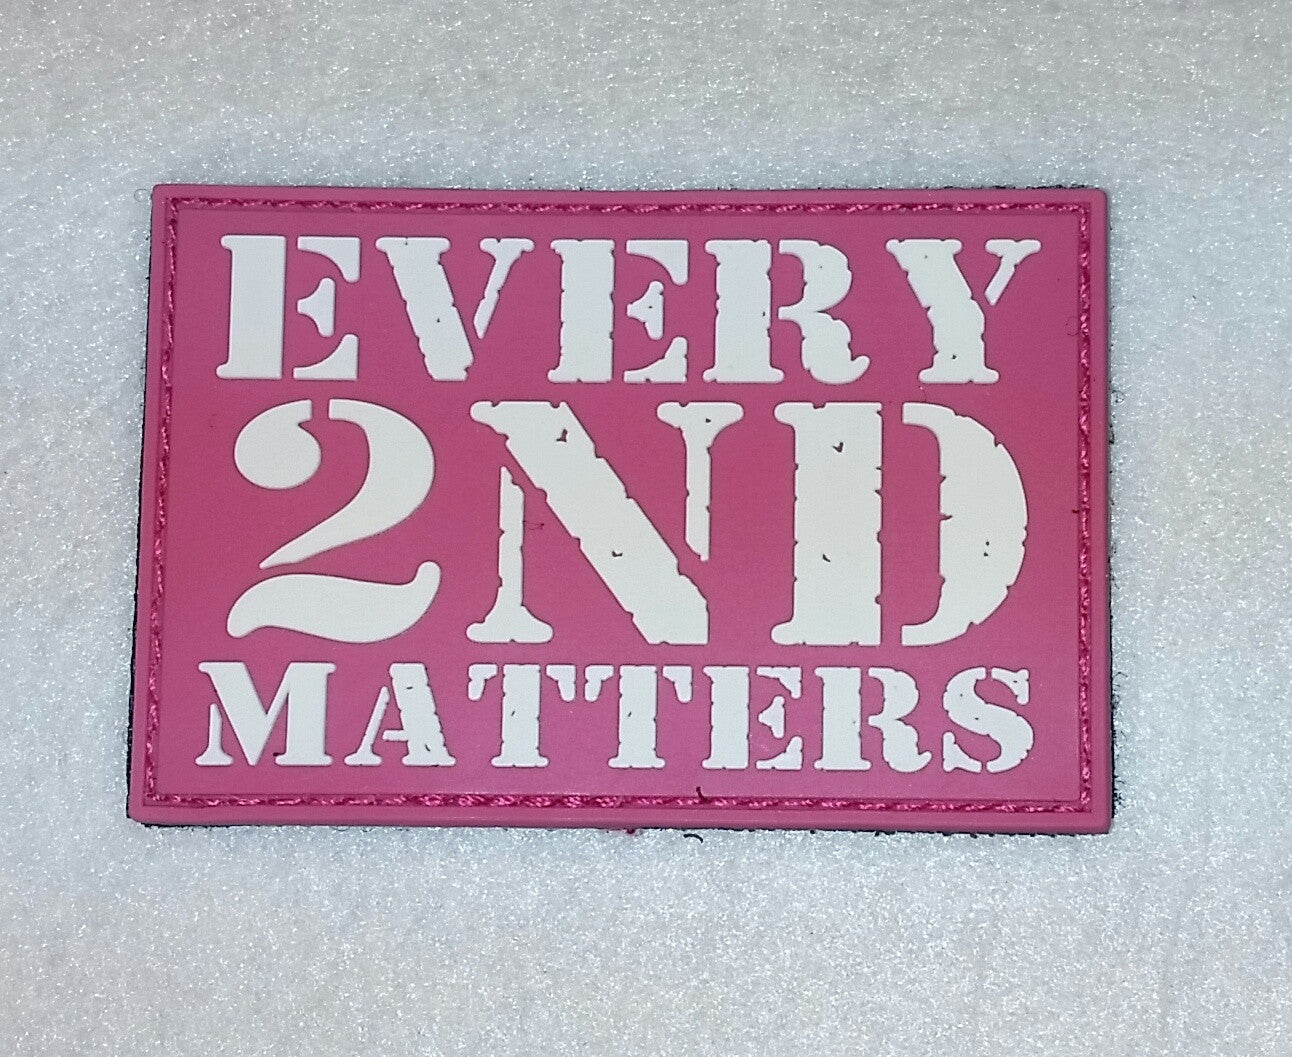 Every 2nd Matters (6th Gen) - PVC Patch